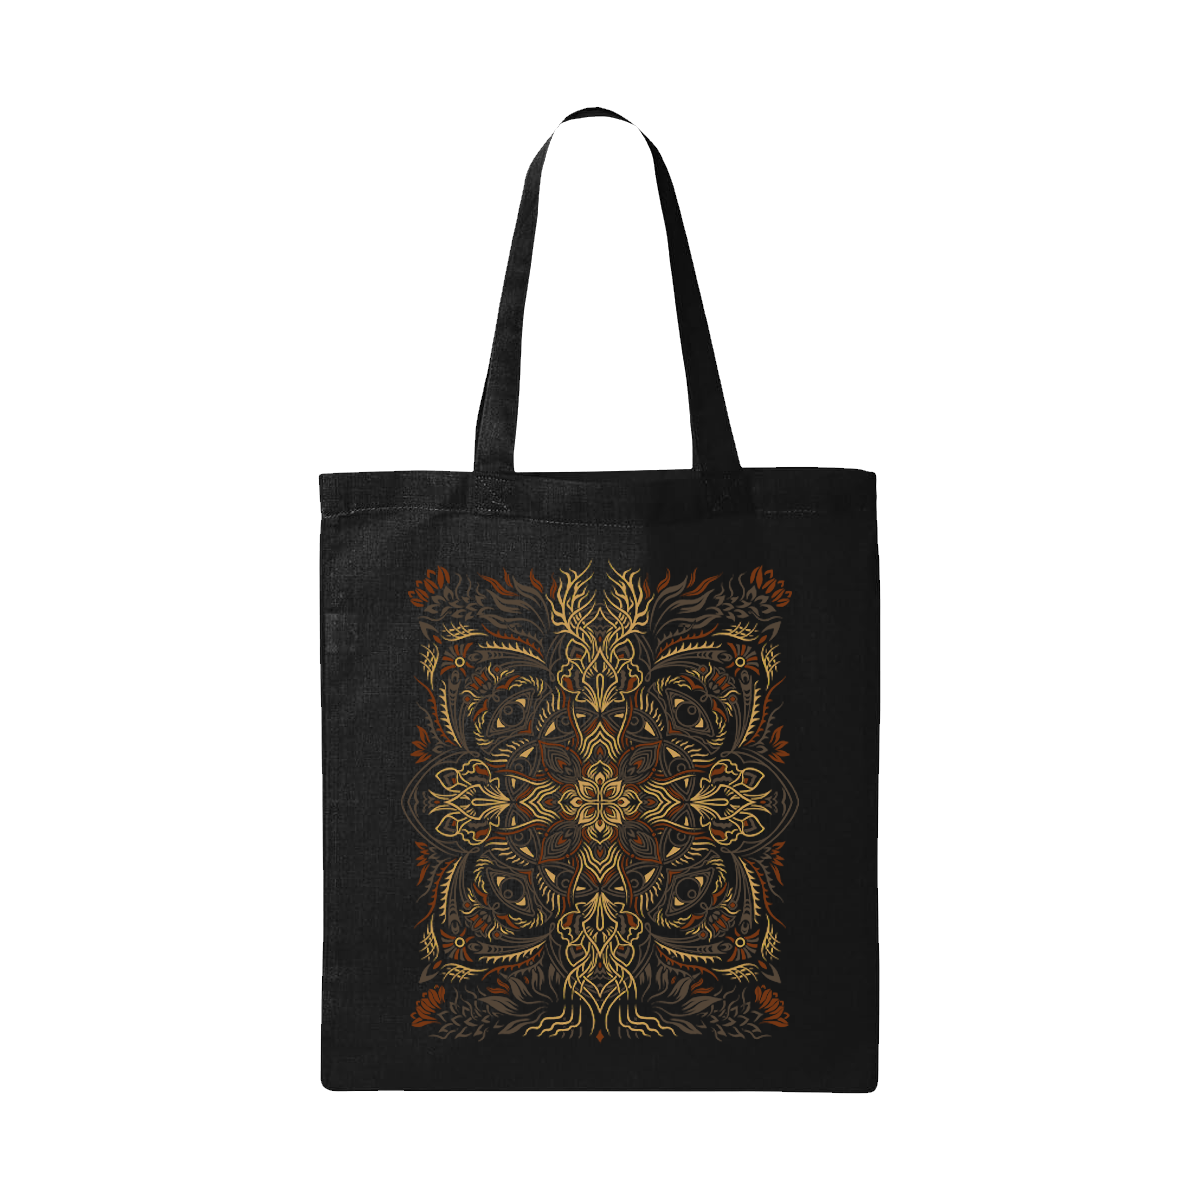 PRE SALE - Of The Trees - Tote Bag